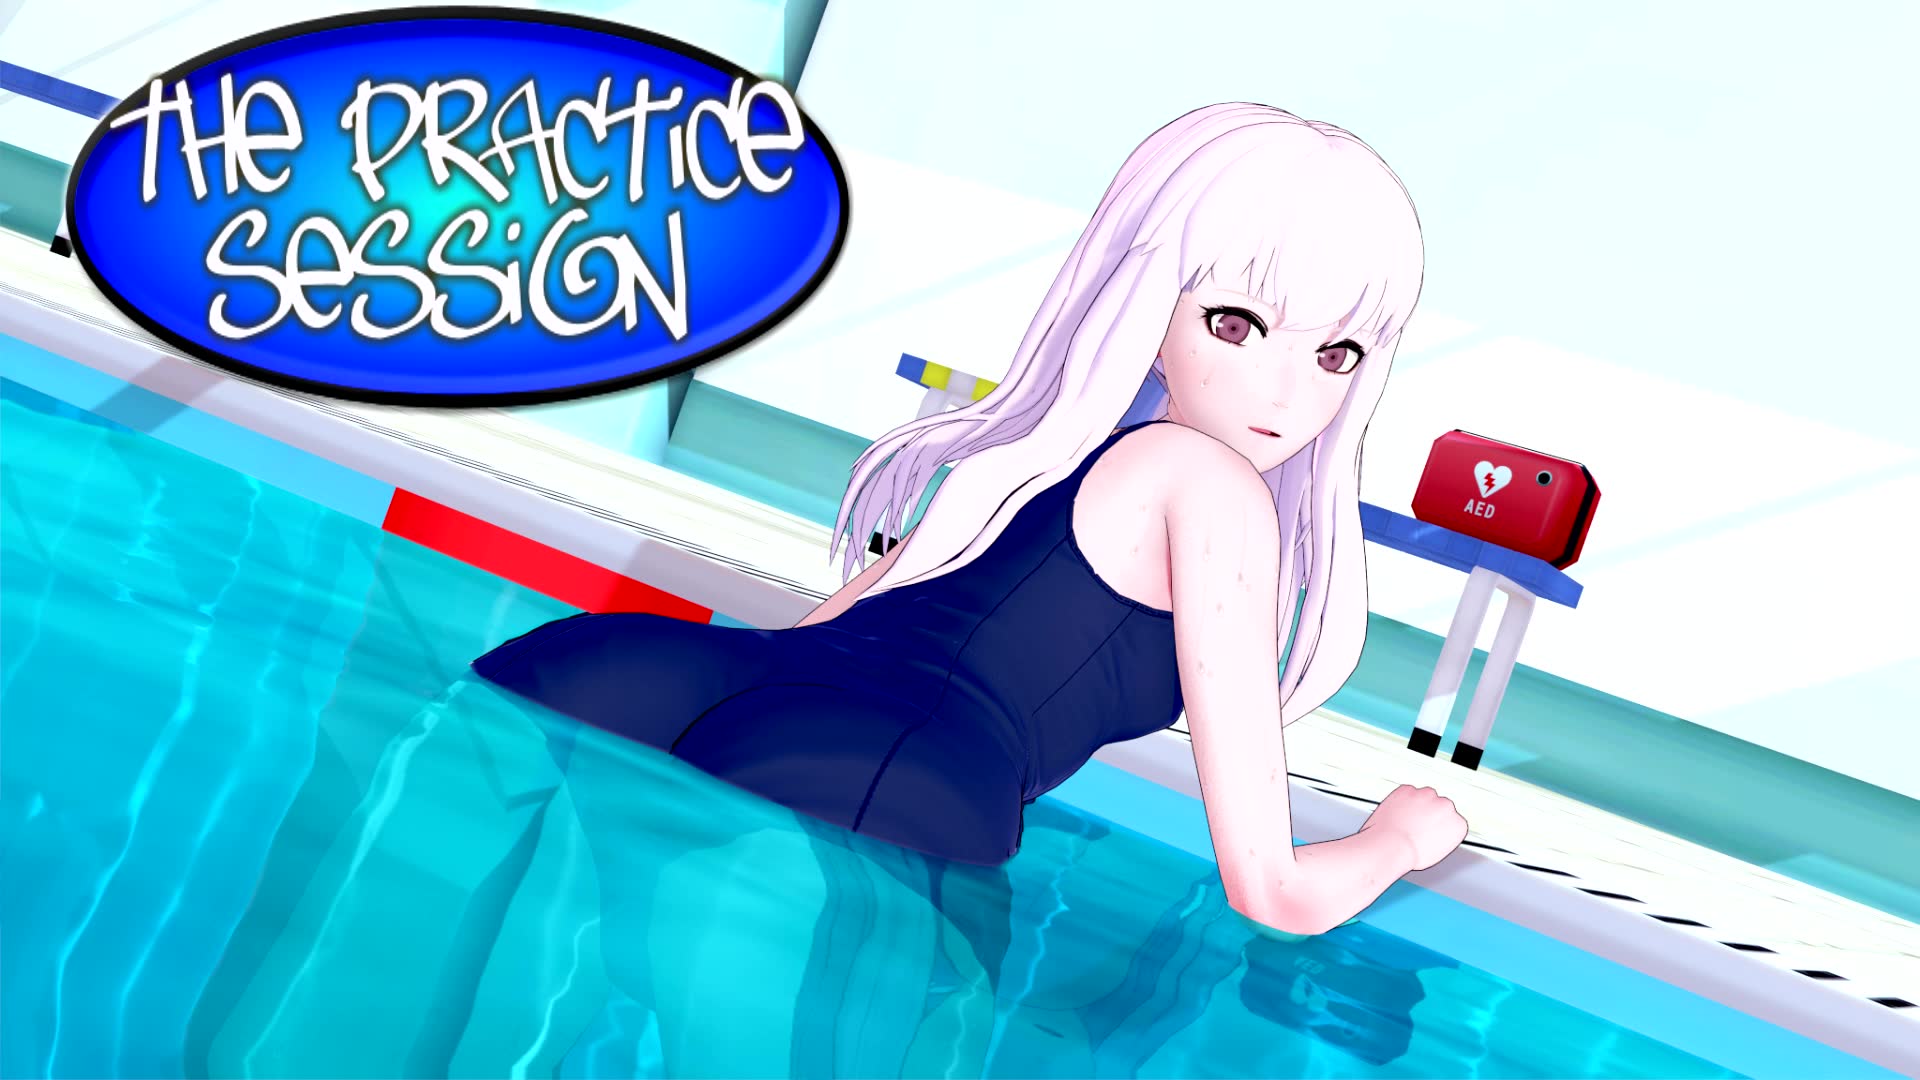 Byleth and Lysithea Von Ordelia have sex in the swimming pool – Fire Emblem NSFW animation thumbnail